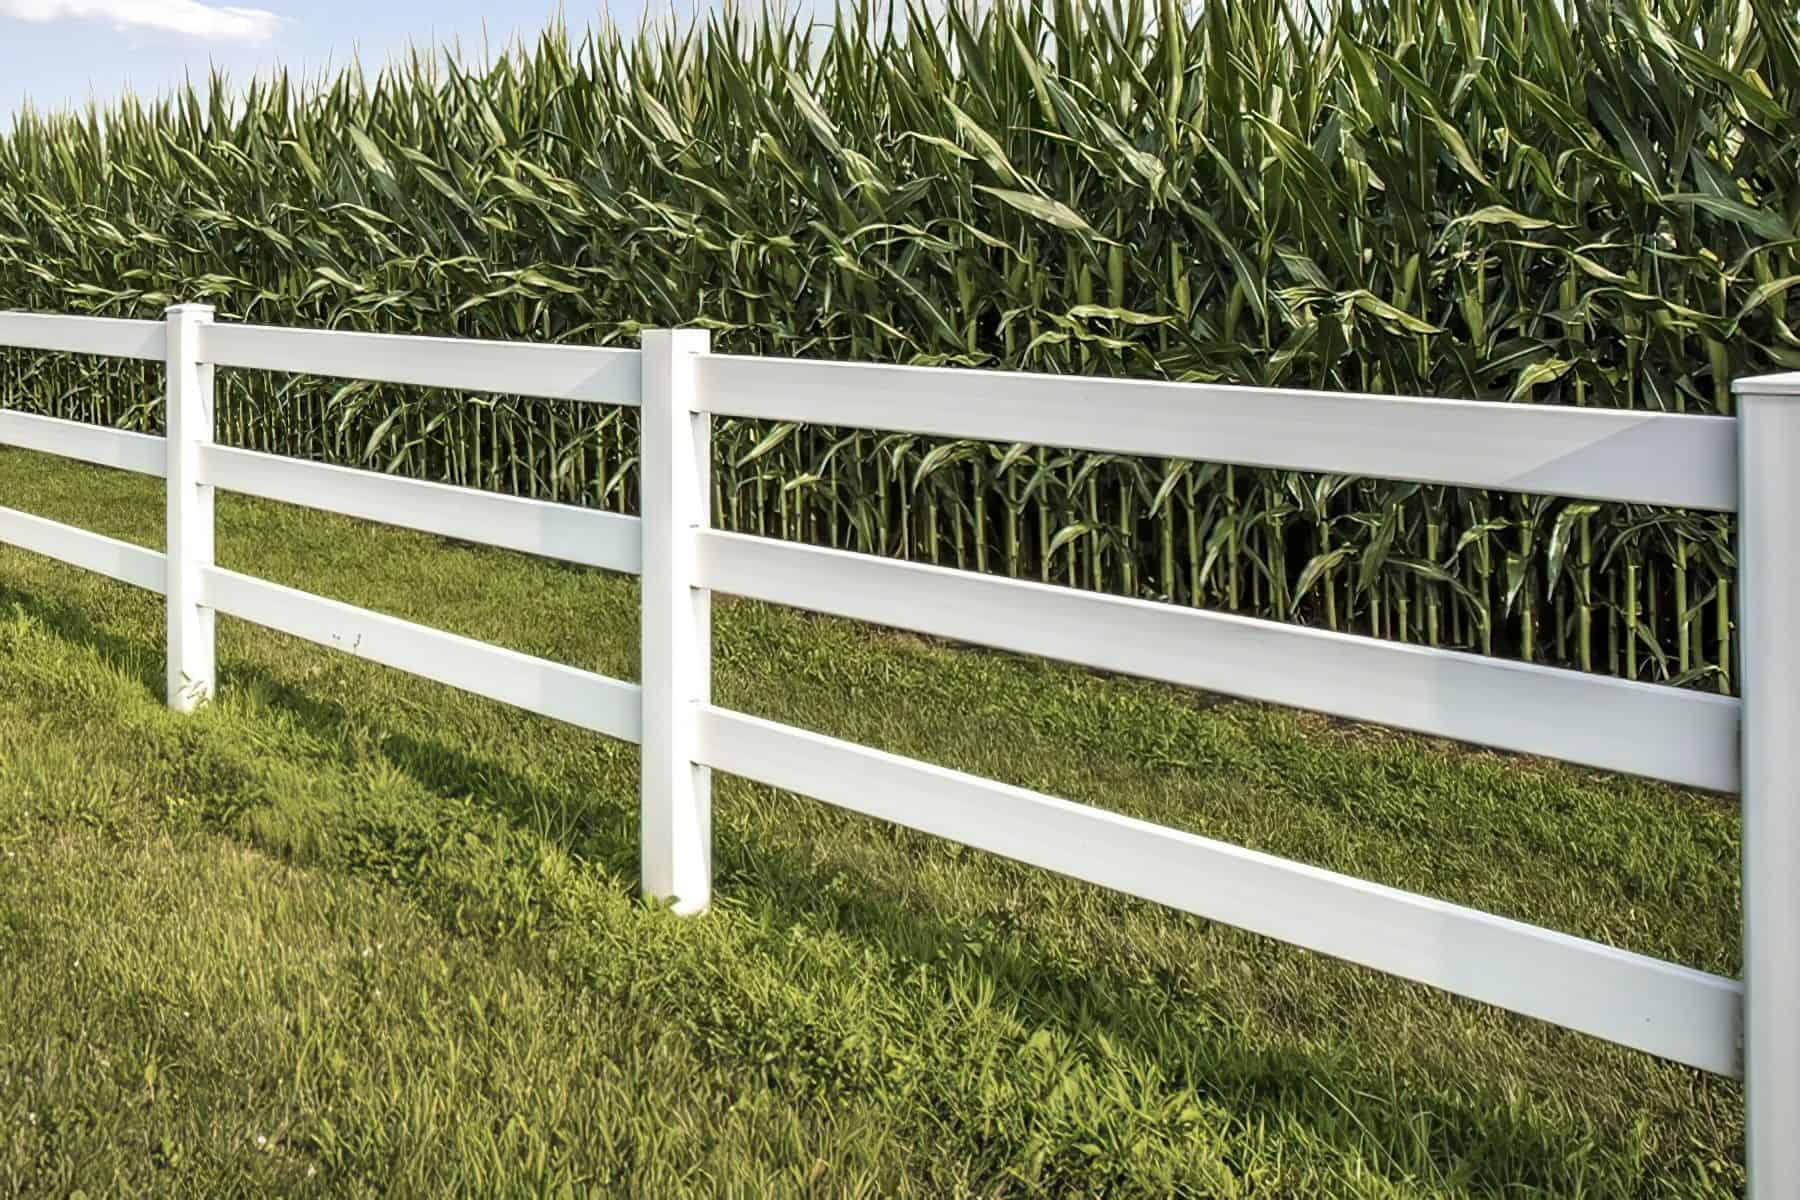 Vinyl 3-rail ranch fence with corn field, grassy lawn, trees, and horse in the background under a clear sky.